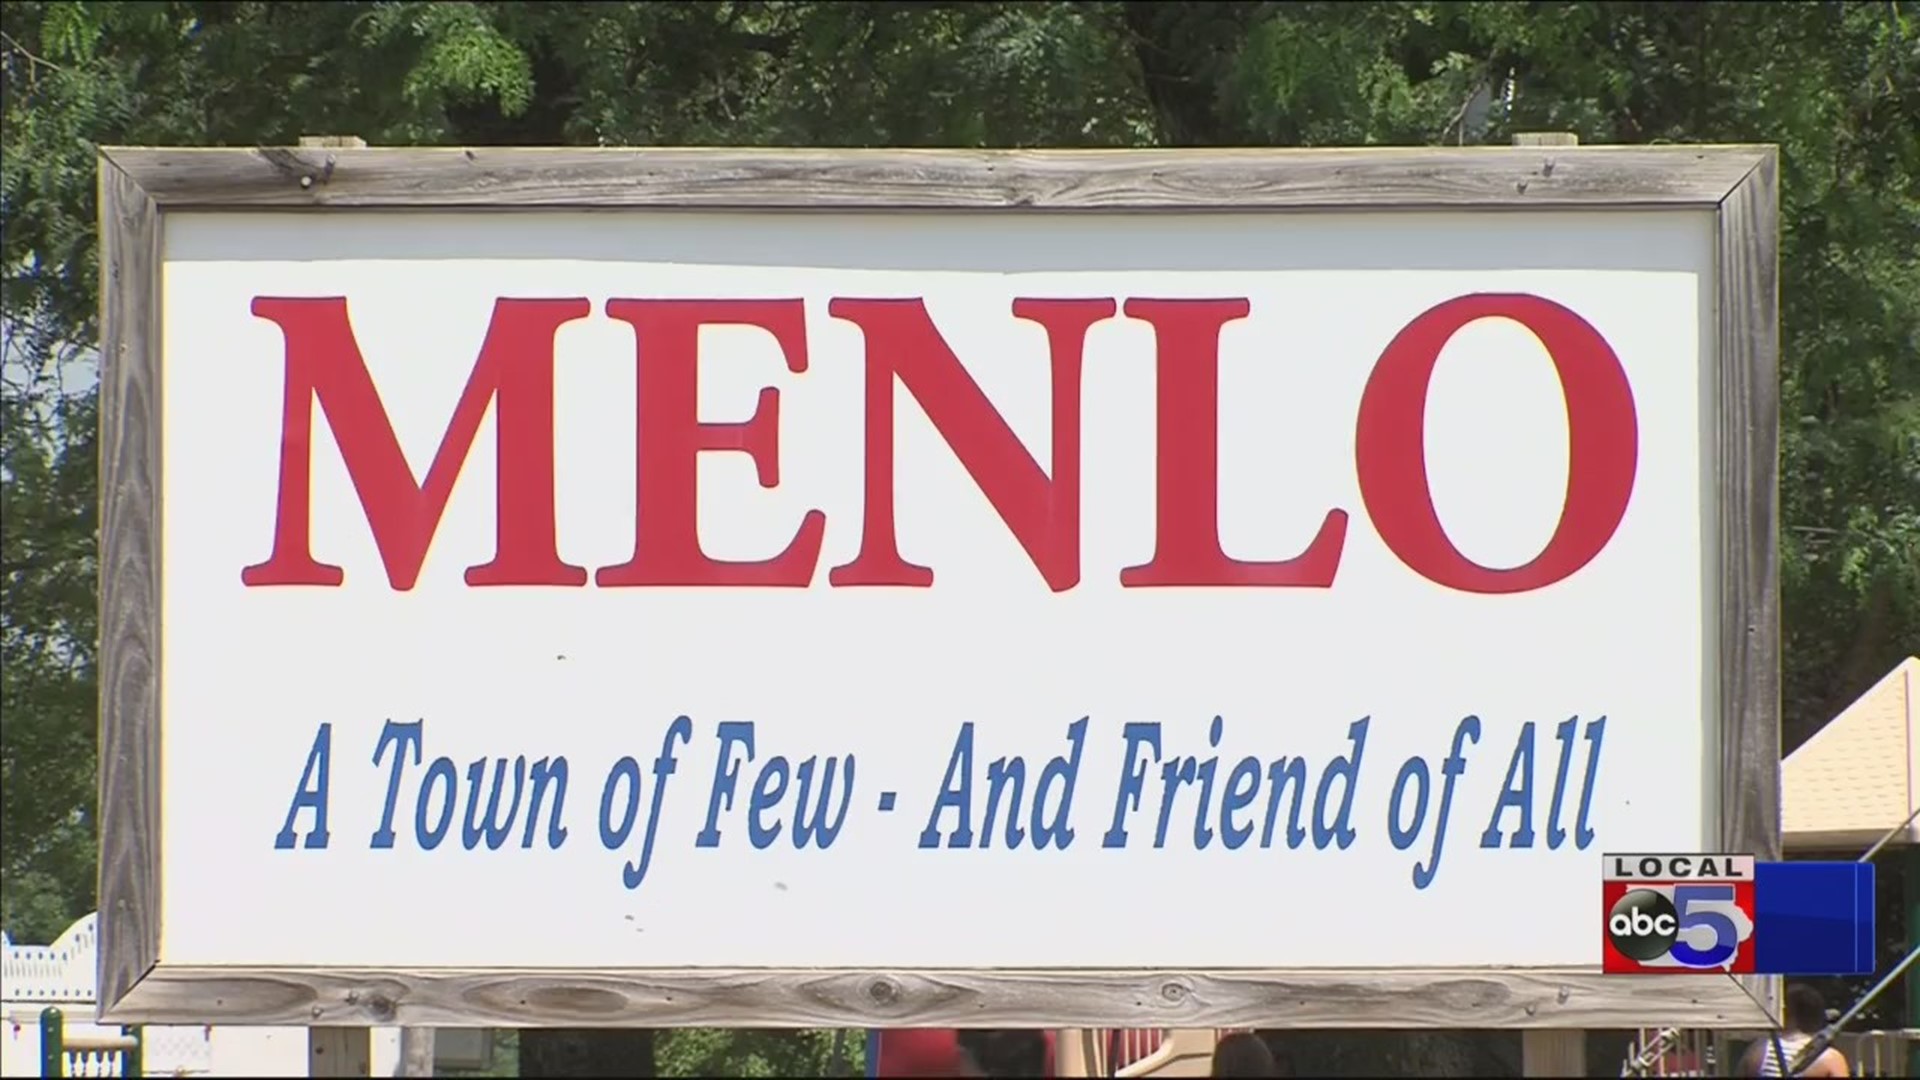 The town of Menlo turns 150-years-old this year. They held a variety of events to celebrate.